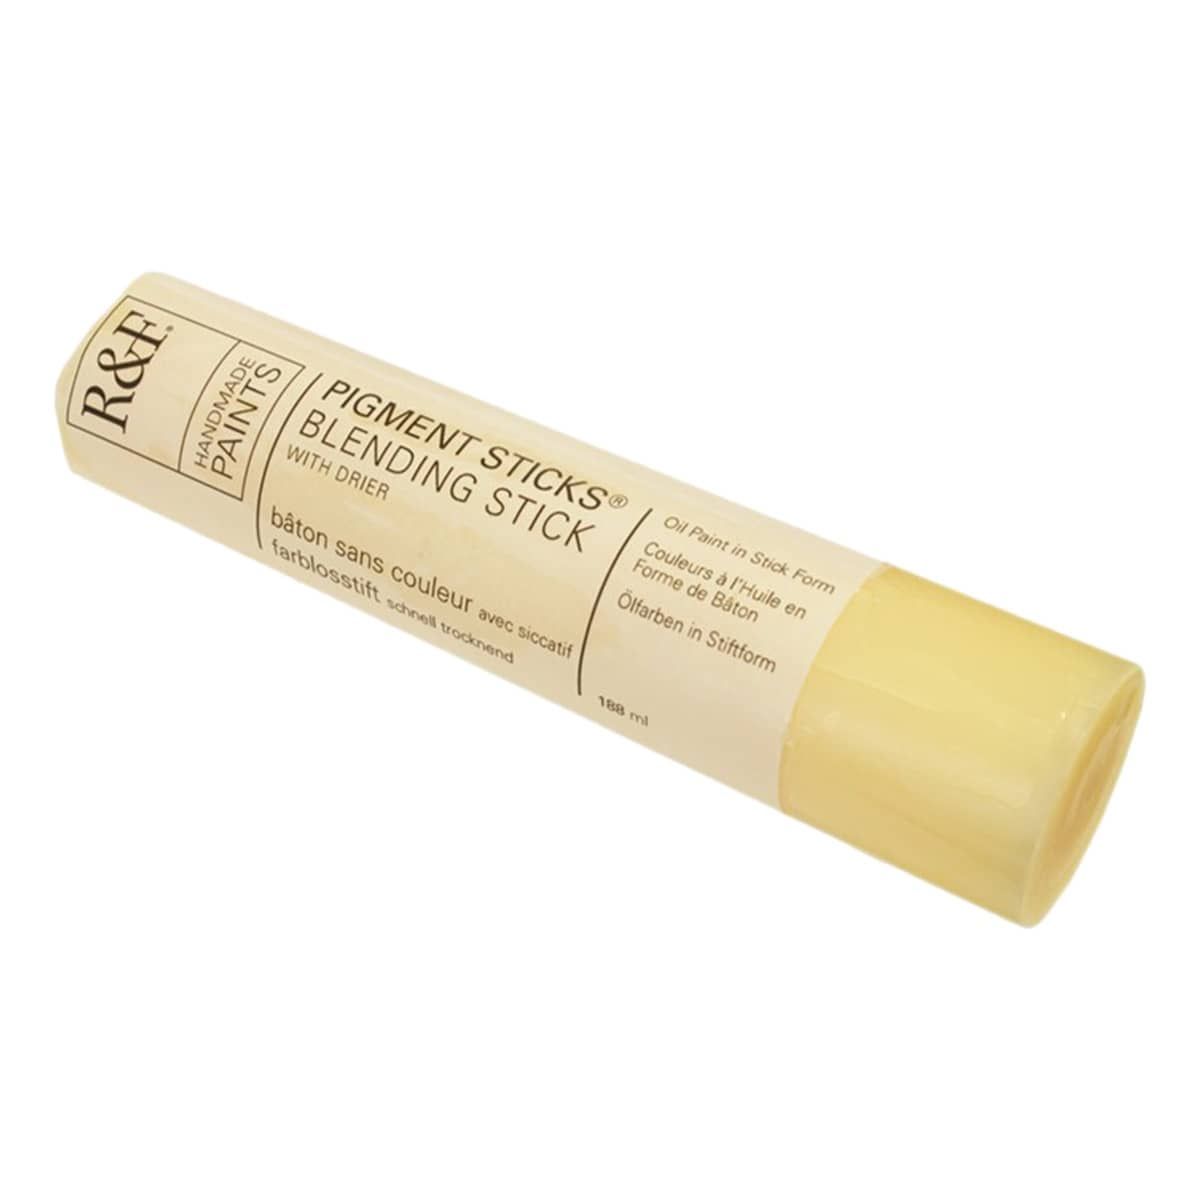 Blending Stick with Drier - 188ml